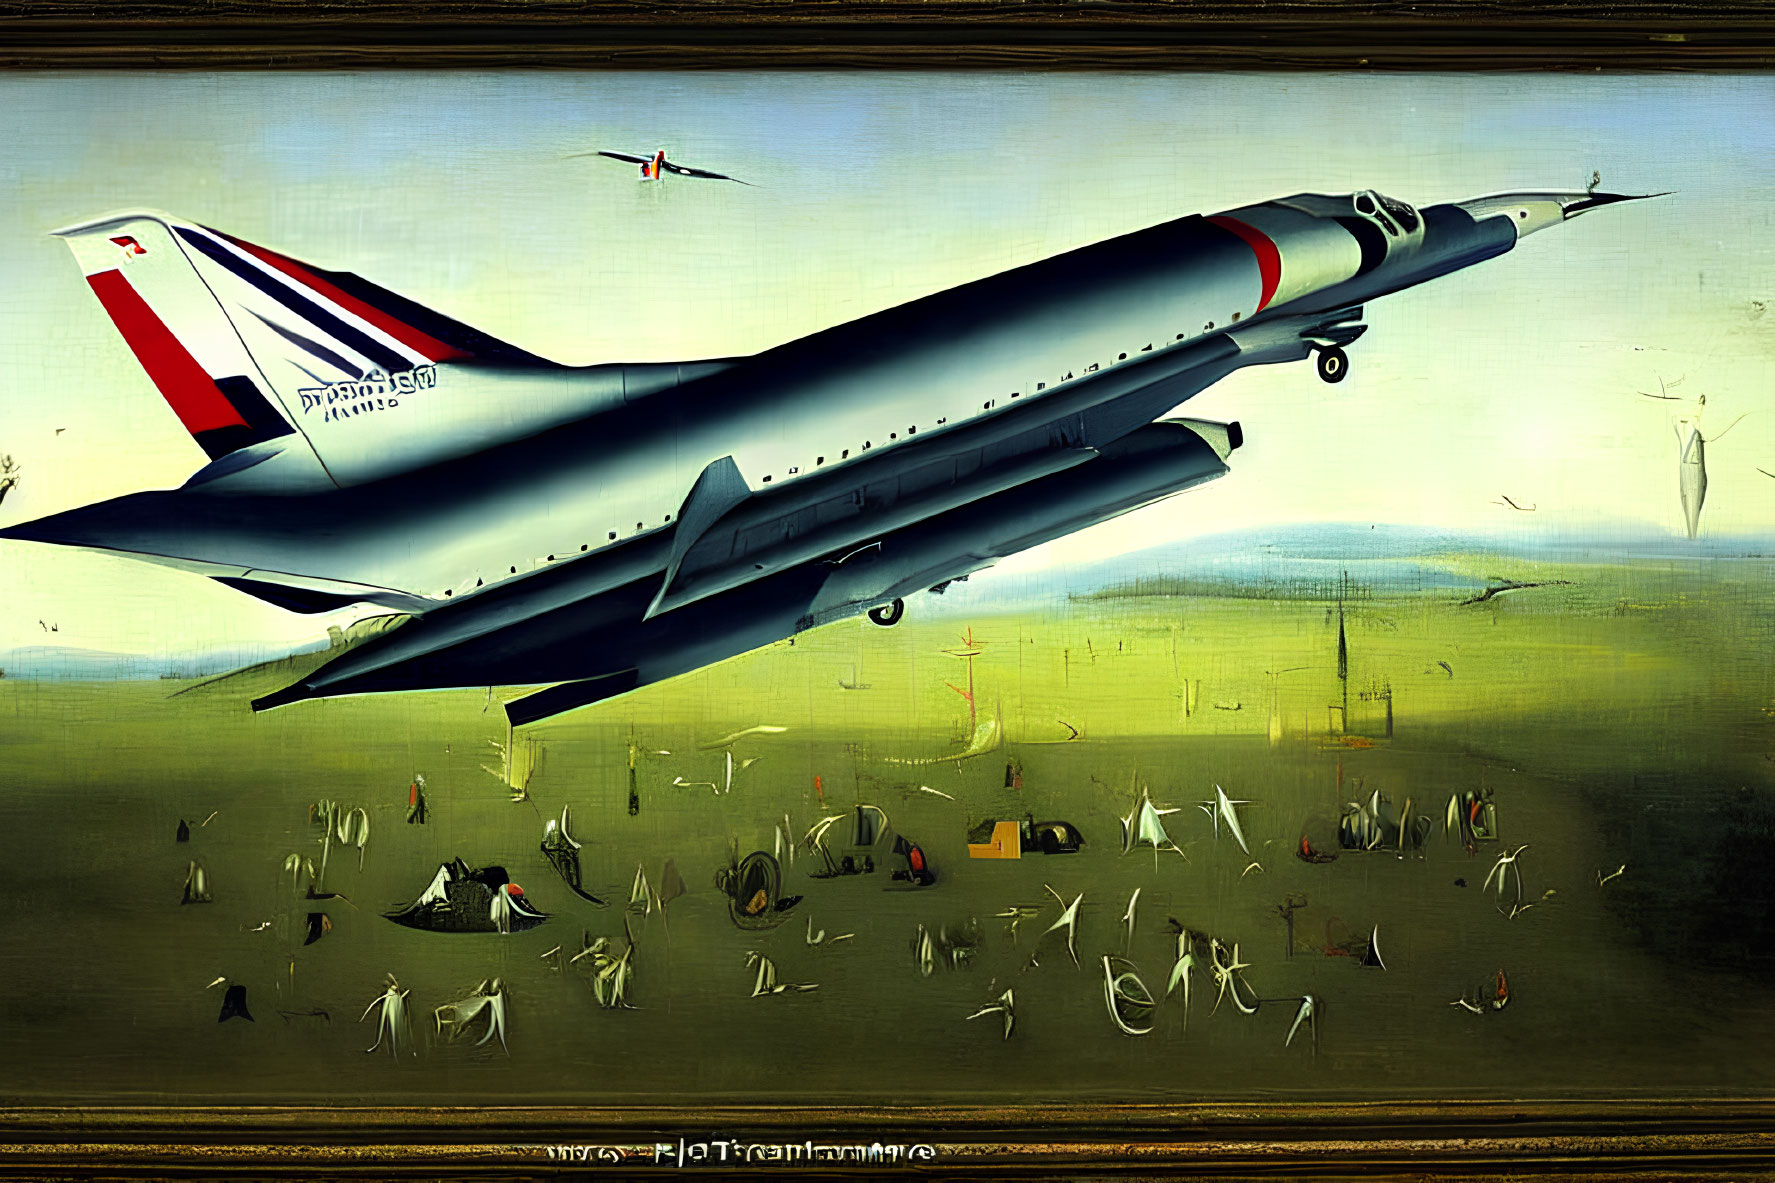 Surreal Concorde aircraft takeoff scene with scattered chairs and figures